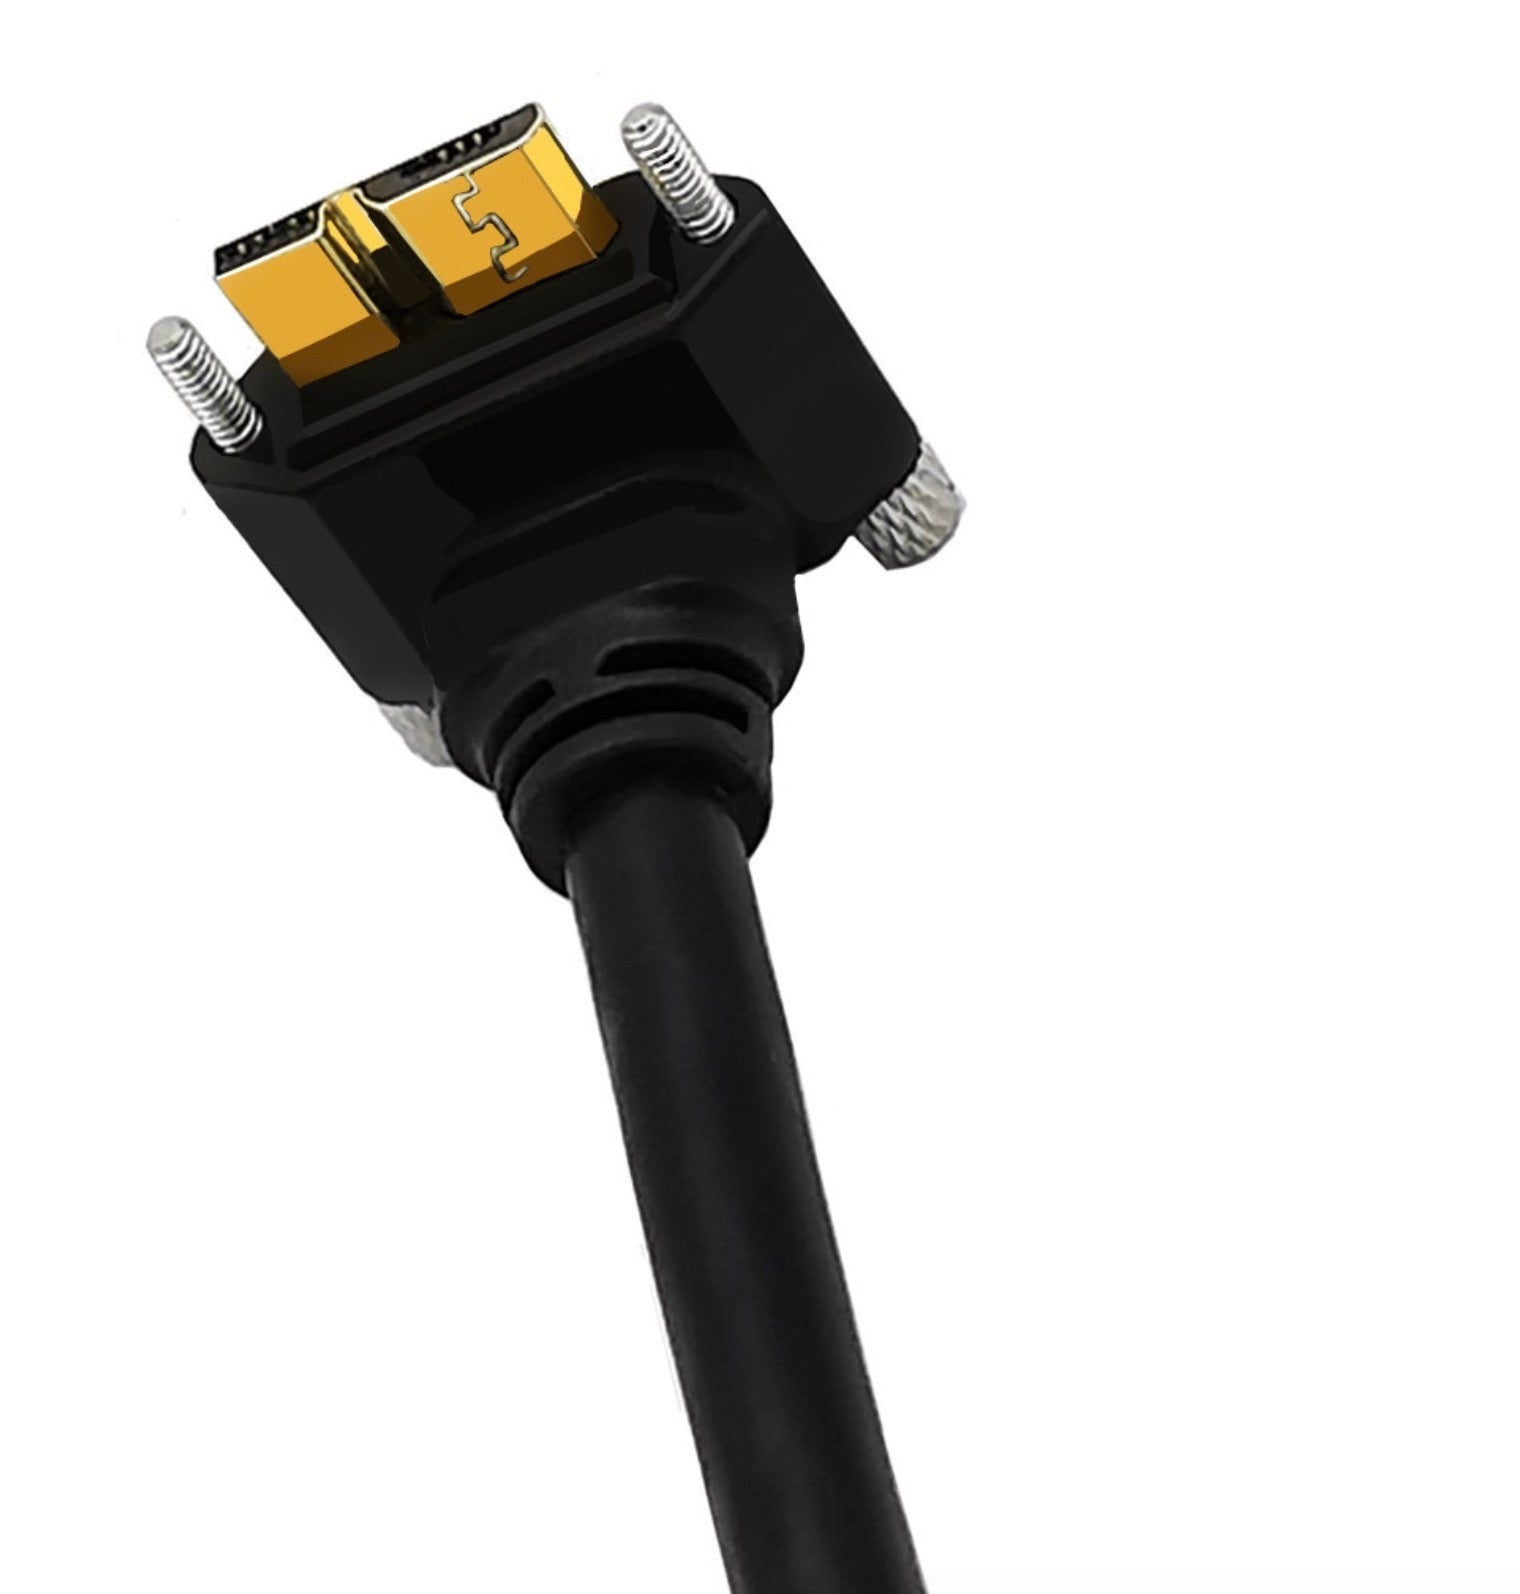 USB-A 3.0 Male to Micro-B Charge & Sync Cable with Screws (Down-Angle)